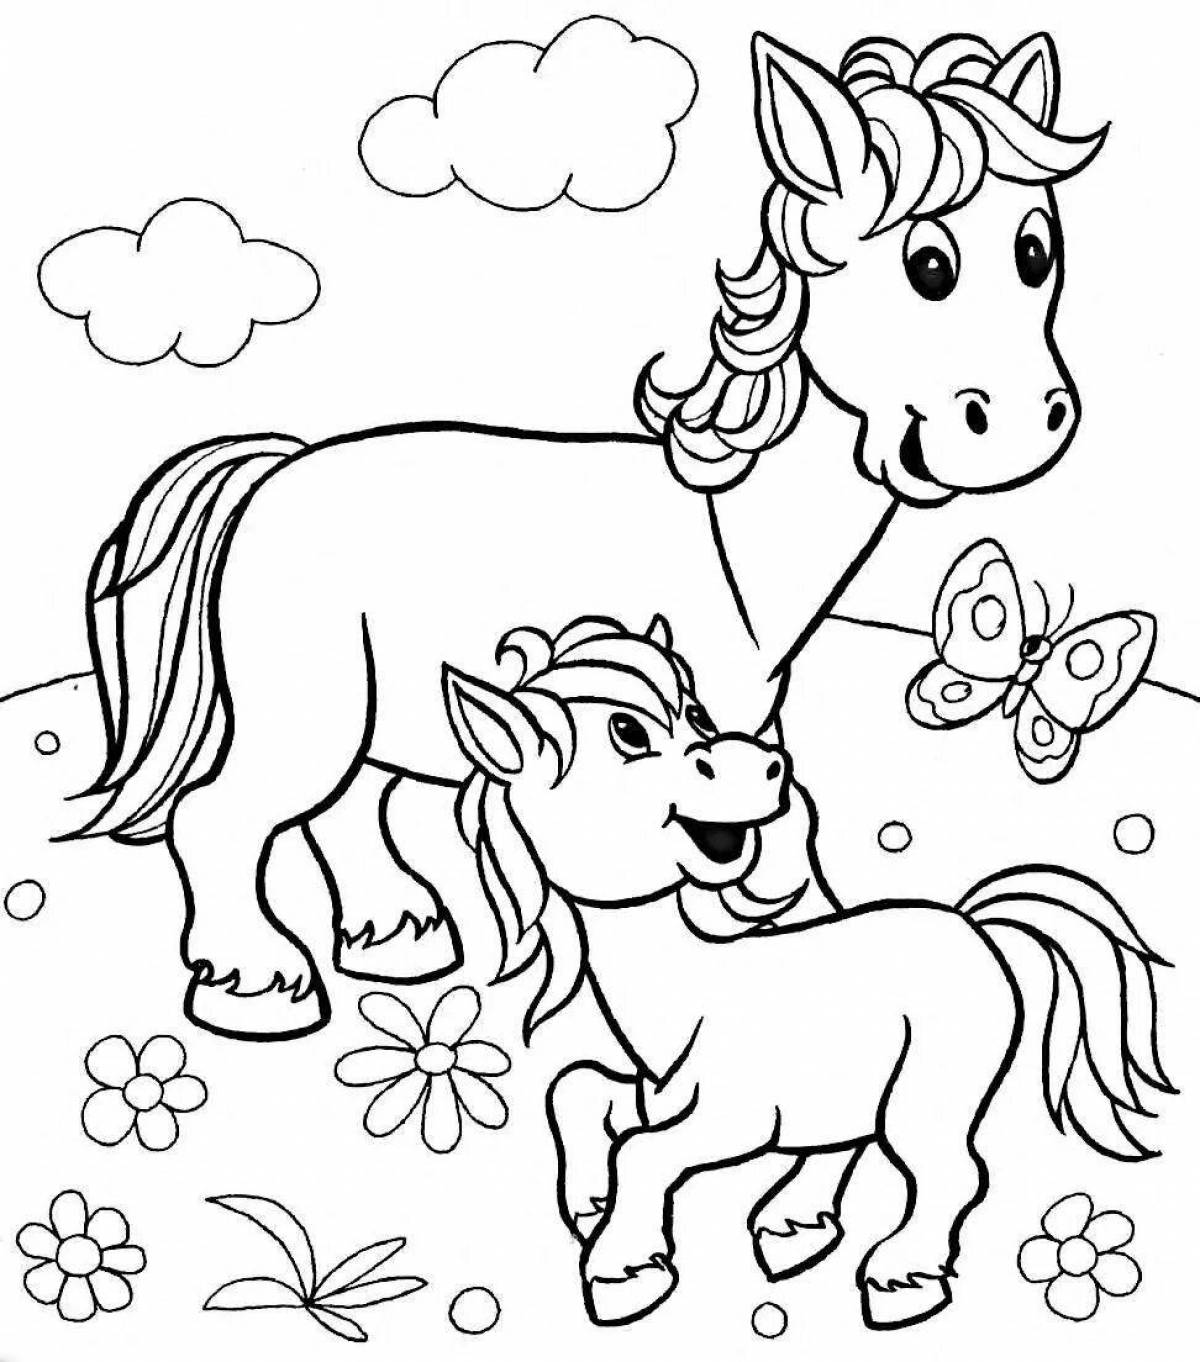 Nice horse coloring book for 4-5 year olds